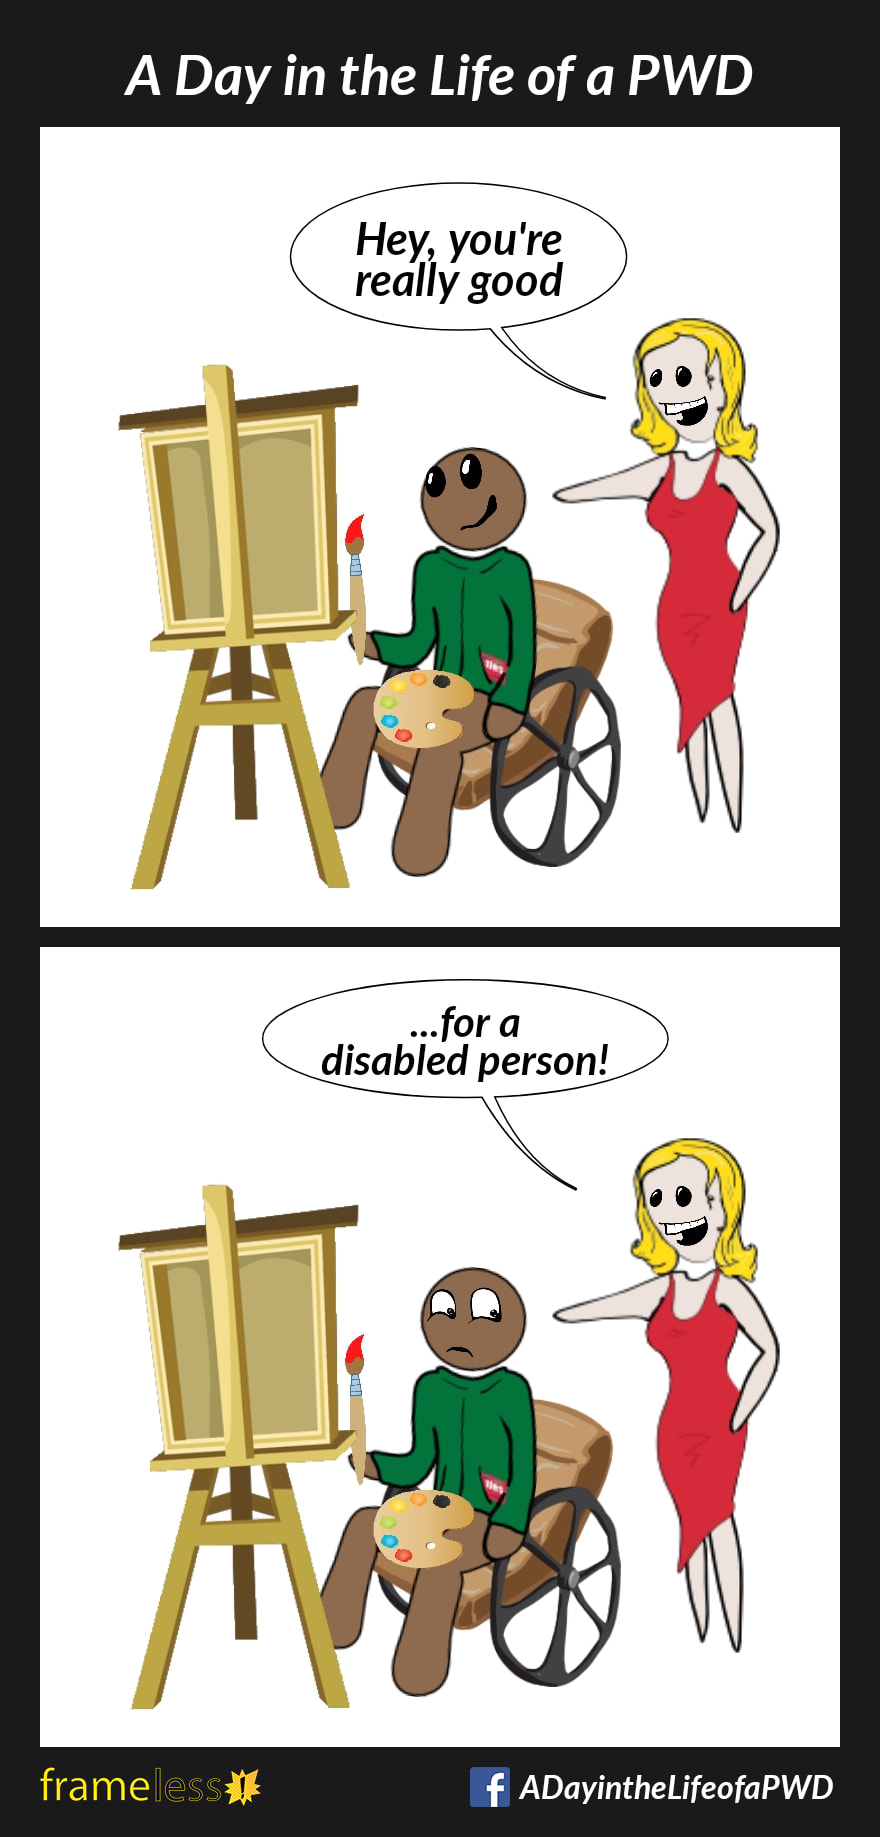 COMIC STRIP 
A Day in the Life of a PWD (Person With a Disability) 

Frame 1:
A man in a wheelchair is painting on an easel.
A woman is admiring his wrok.
WOMAN: Hey, you're really good

Frame 2:
WOMAN: ...for a disabled person.